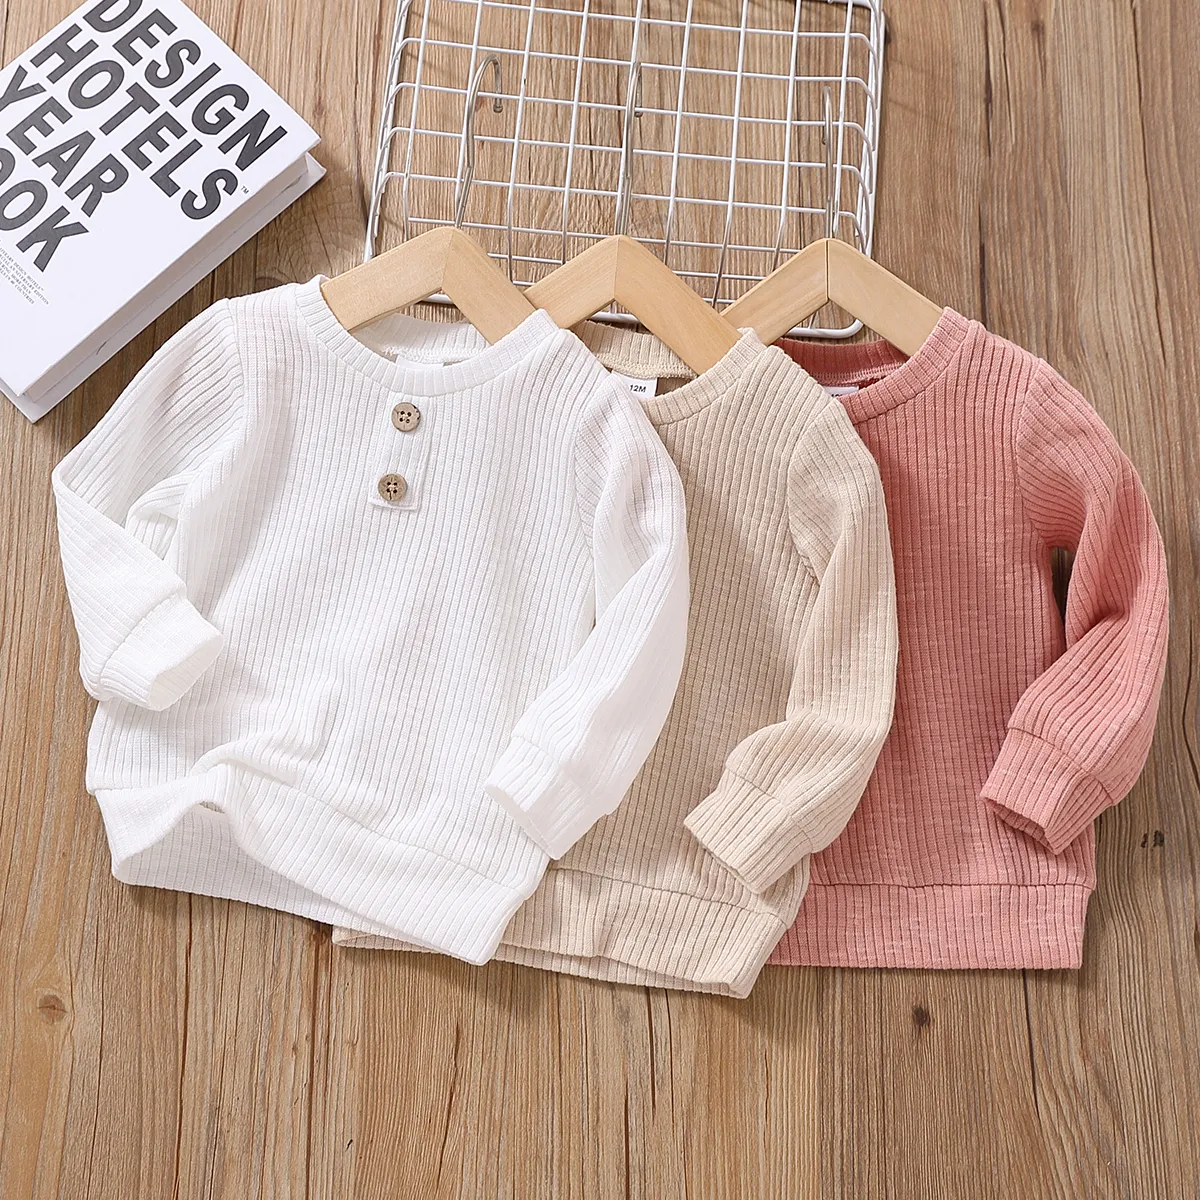 Baby Boy/Girl Button Design Solid Ribbed Knitted Long-sleeve Pullover Top Pink big image 1